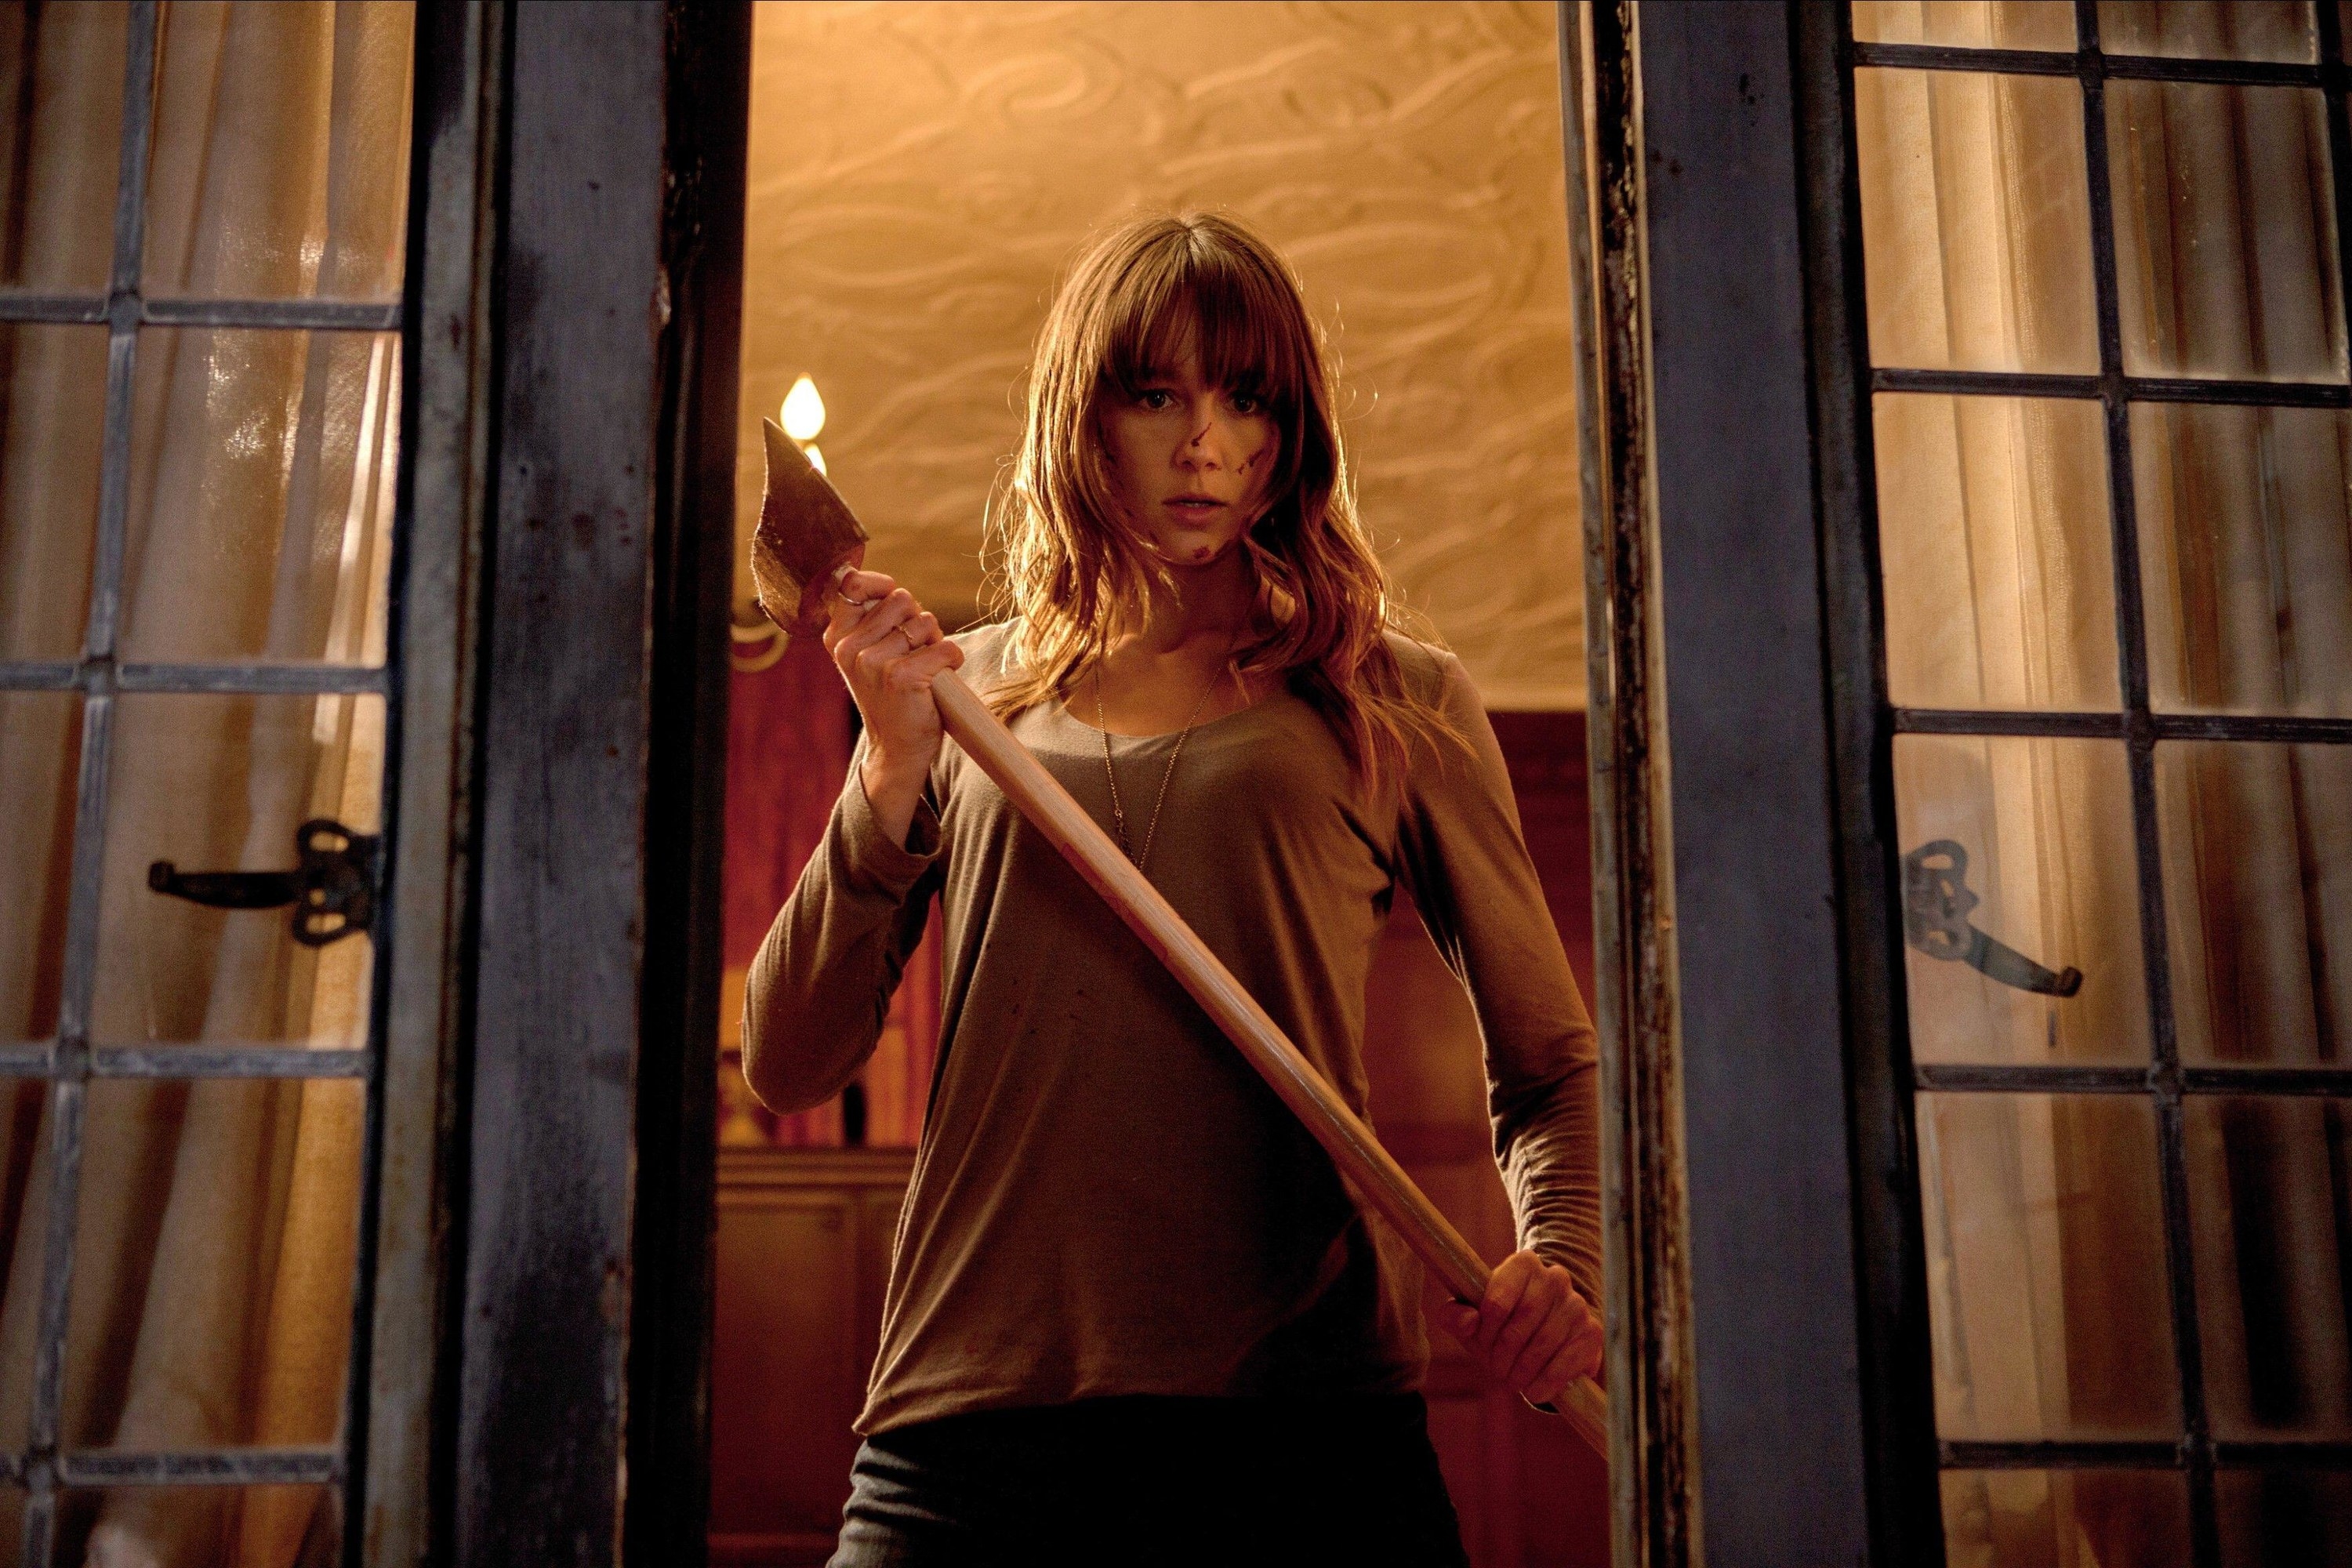 Sharni Vinson stands in an open window holding an axe in an intimidating fashion